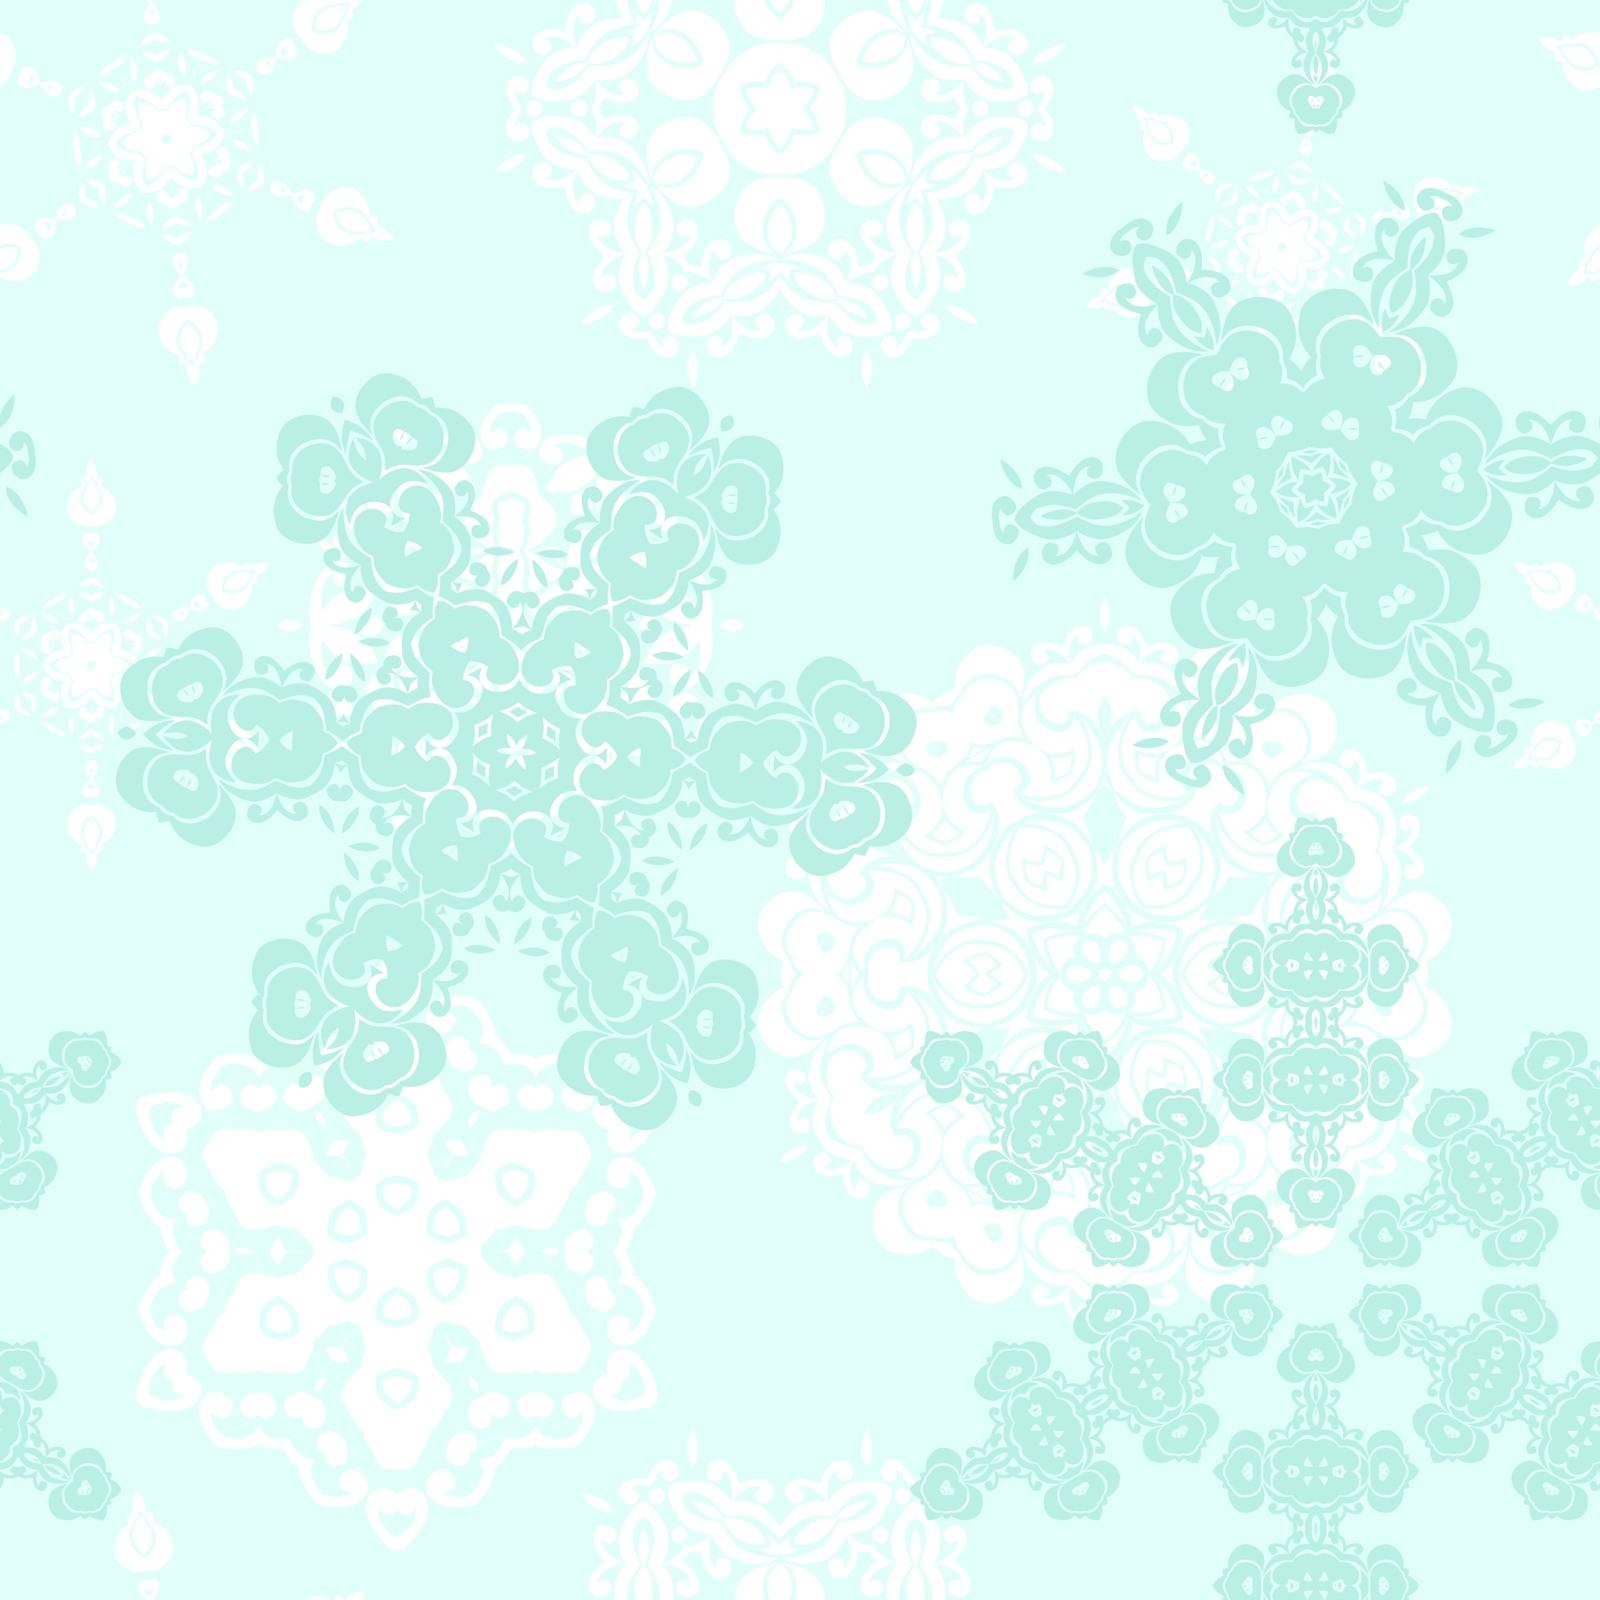 Perfect graphical seamless pattern with snowflakes. Geometrical texture maed in vector. Unique background for invitations, cards, websites.